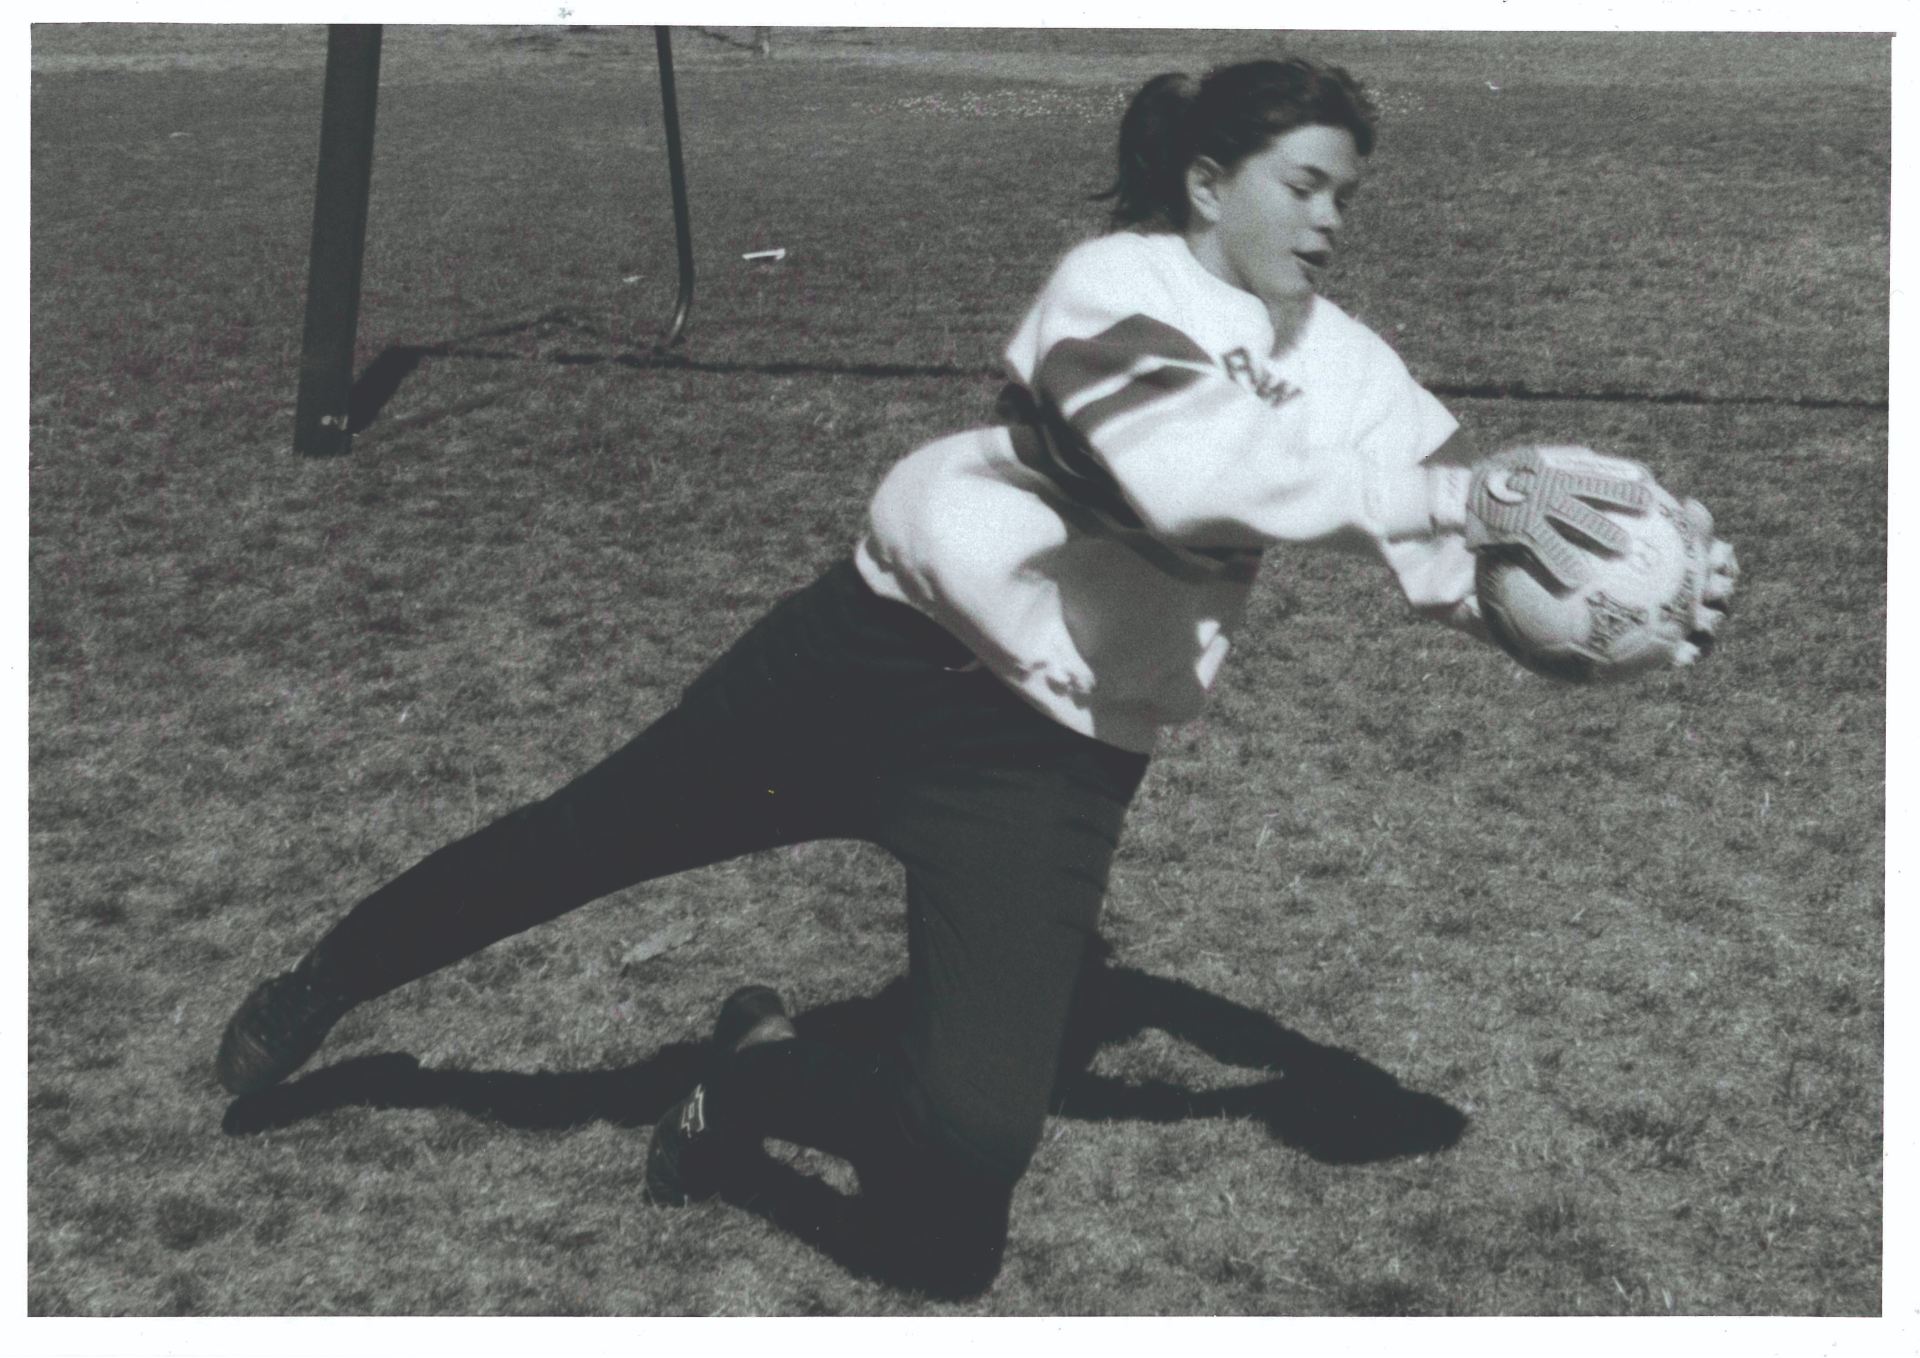 President Beilock playing soccer as a youth